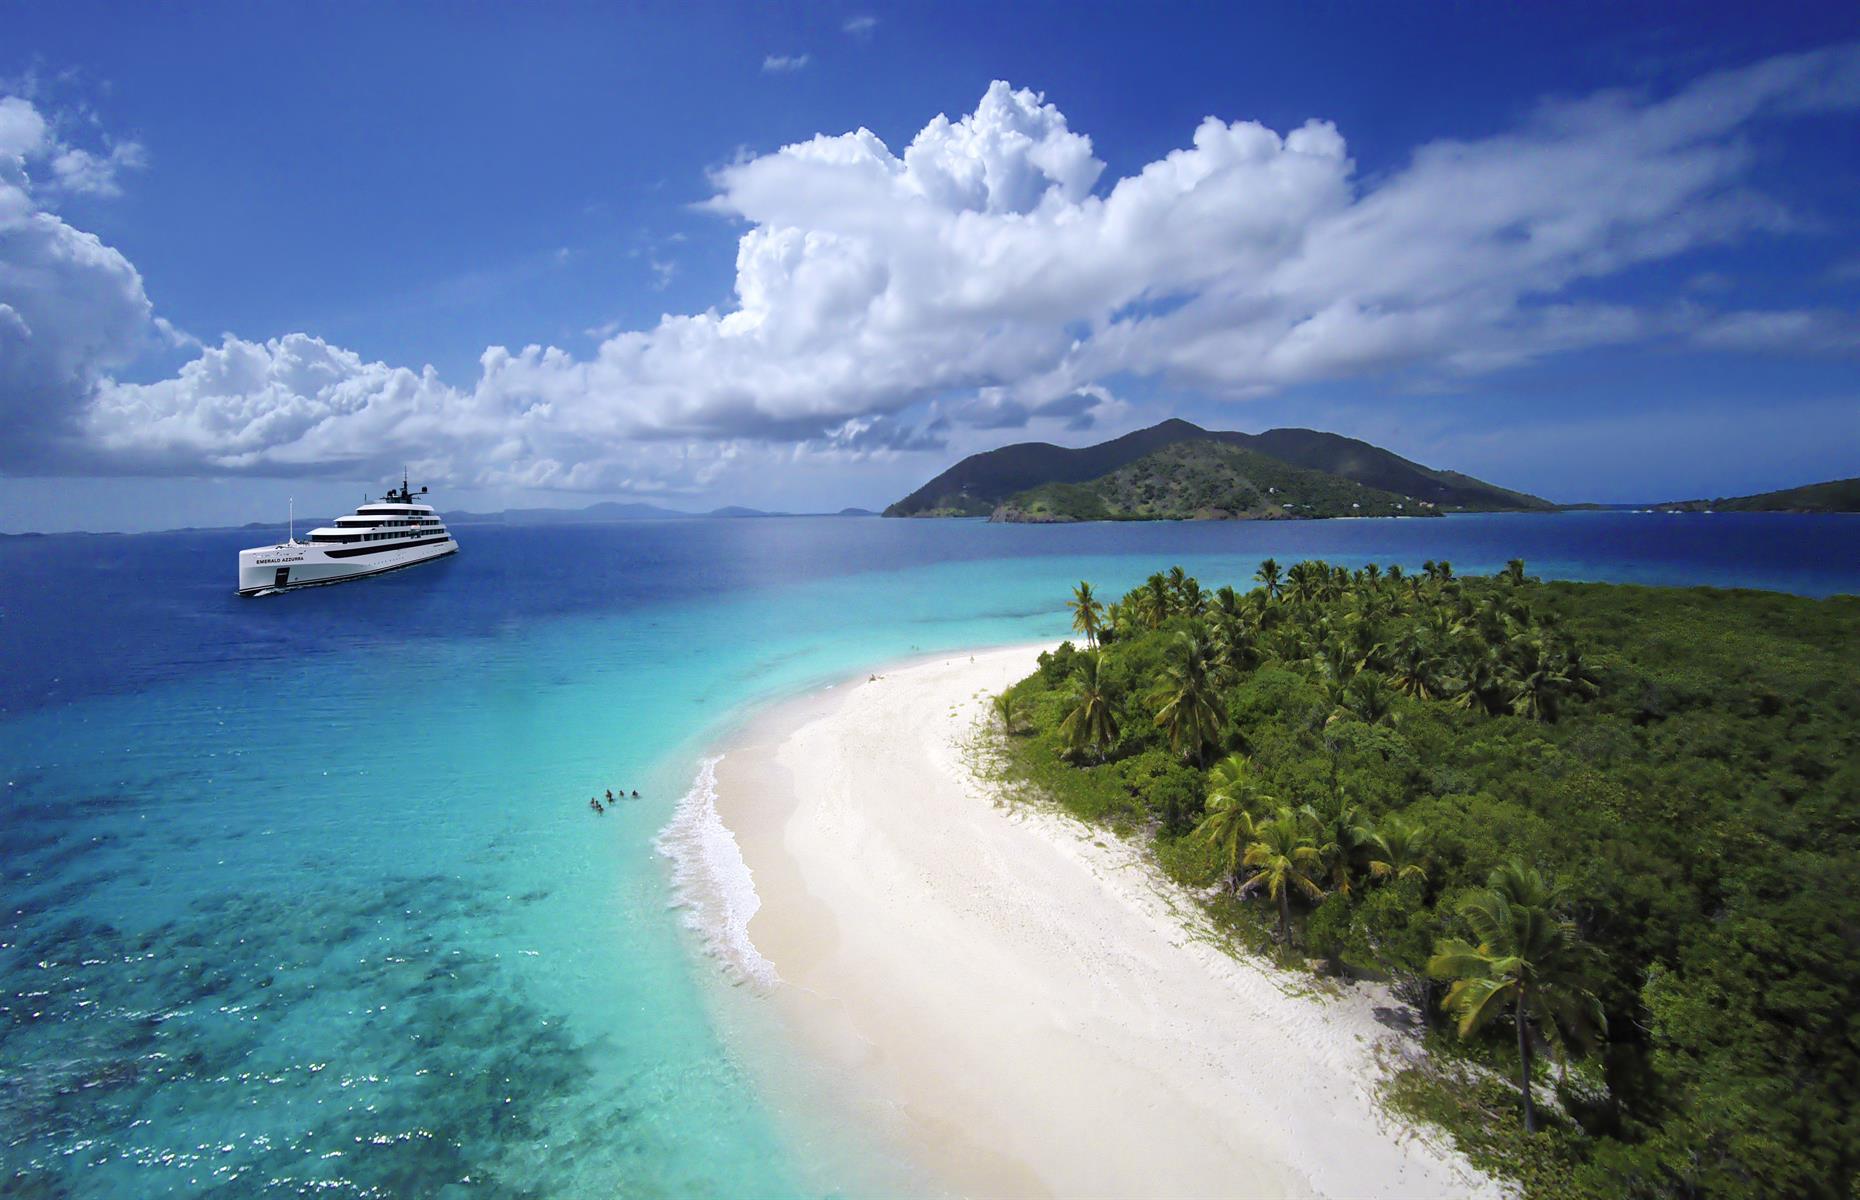 <p>Ever dreamt of exploring the Seychelles? A cruise is one of the best ways to do it, flitting from one island to another without having to worry about pricey seaplane transfers or chartering private boats. Typical stops on Seychelles cruises include the island of La Digue, where excursions provide the inside track on beautiful French architecture; and Praslin Island, with its pristine reef (the reason it’s a brilliant diving and snorkelling spot). Curieuse, meanwhile, is famous for its friendly giant tortoises and the world's only coco-de-mer forest.</p>